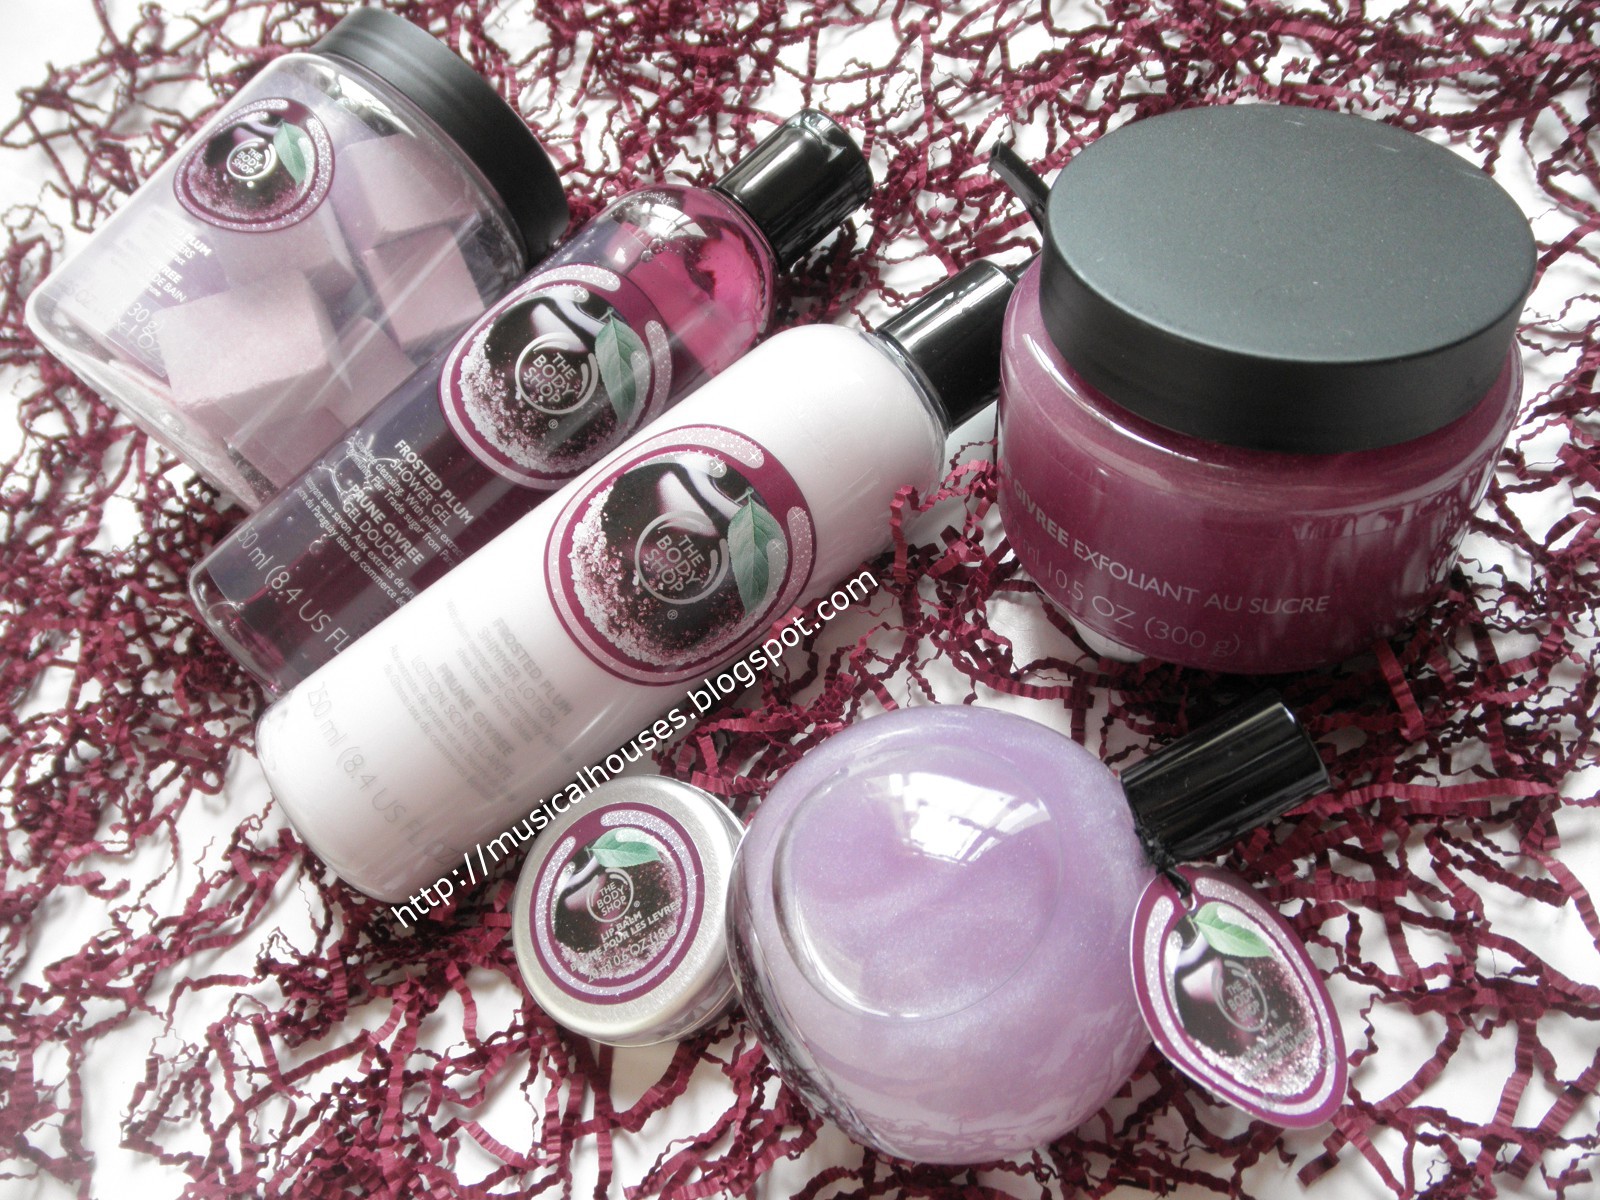 Triumferende tiltrækkende underviser The Body Shop Frosted Plum Review and Ingredients Analysis: Sugar Scrub, Body  Lotion, Shower Gel - of Faces and Fingers